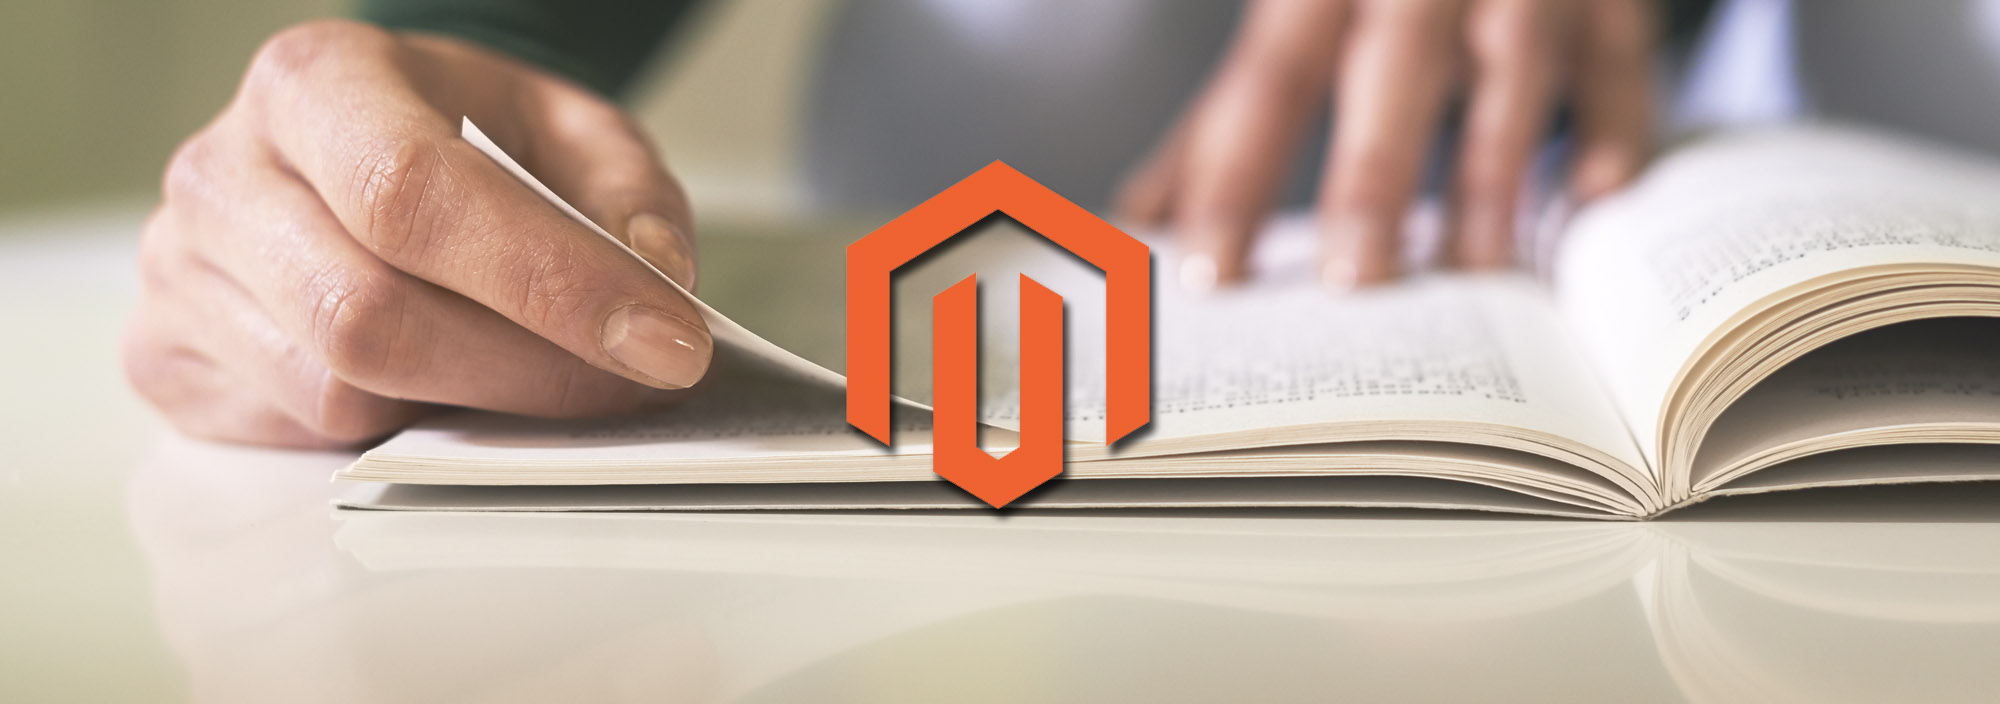 4 Magento Extensions for Increasing Conversion Rate